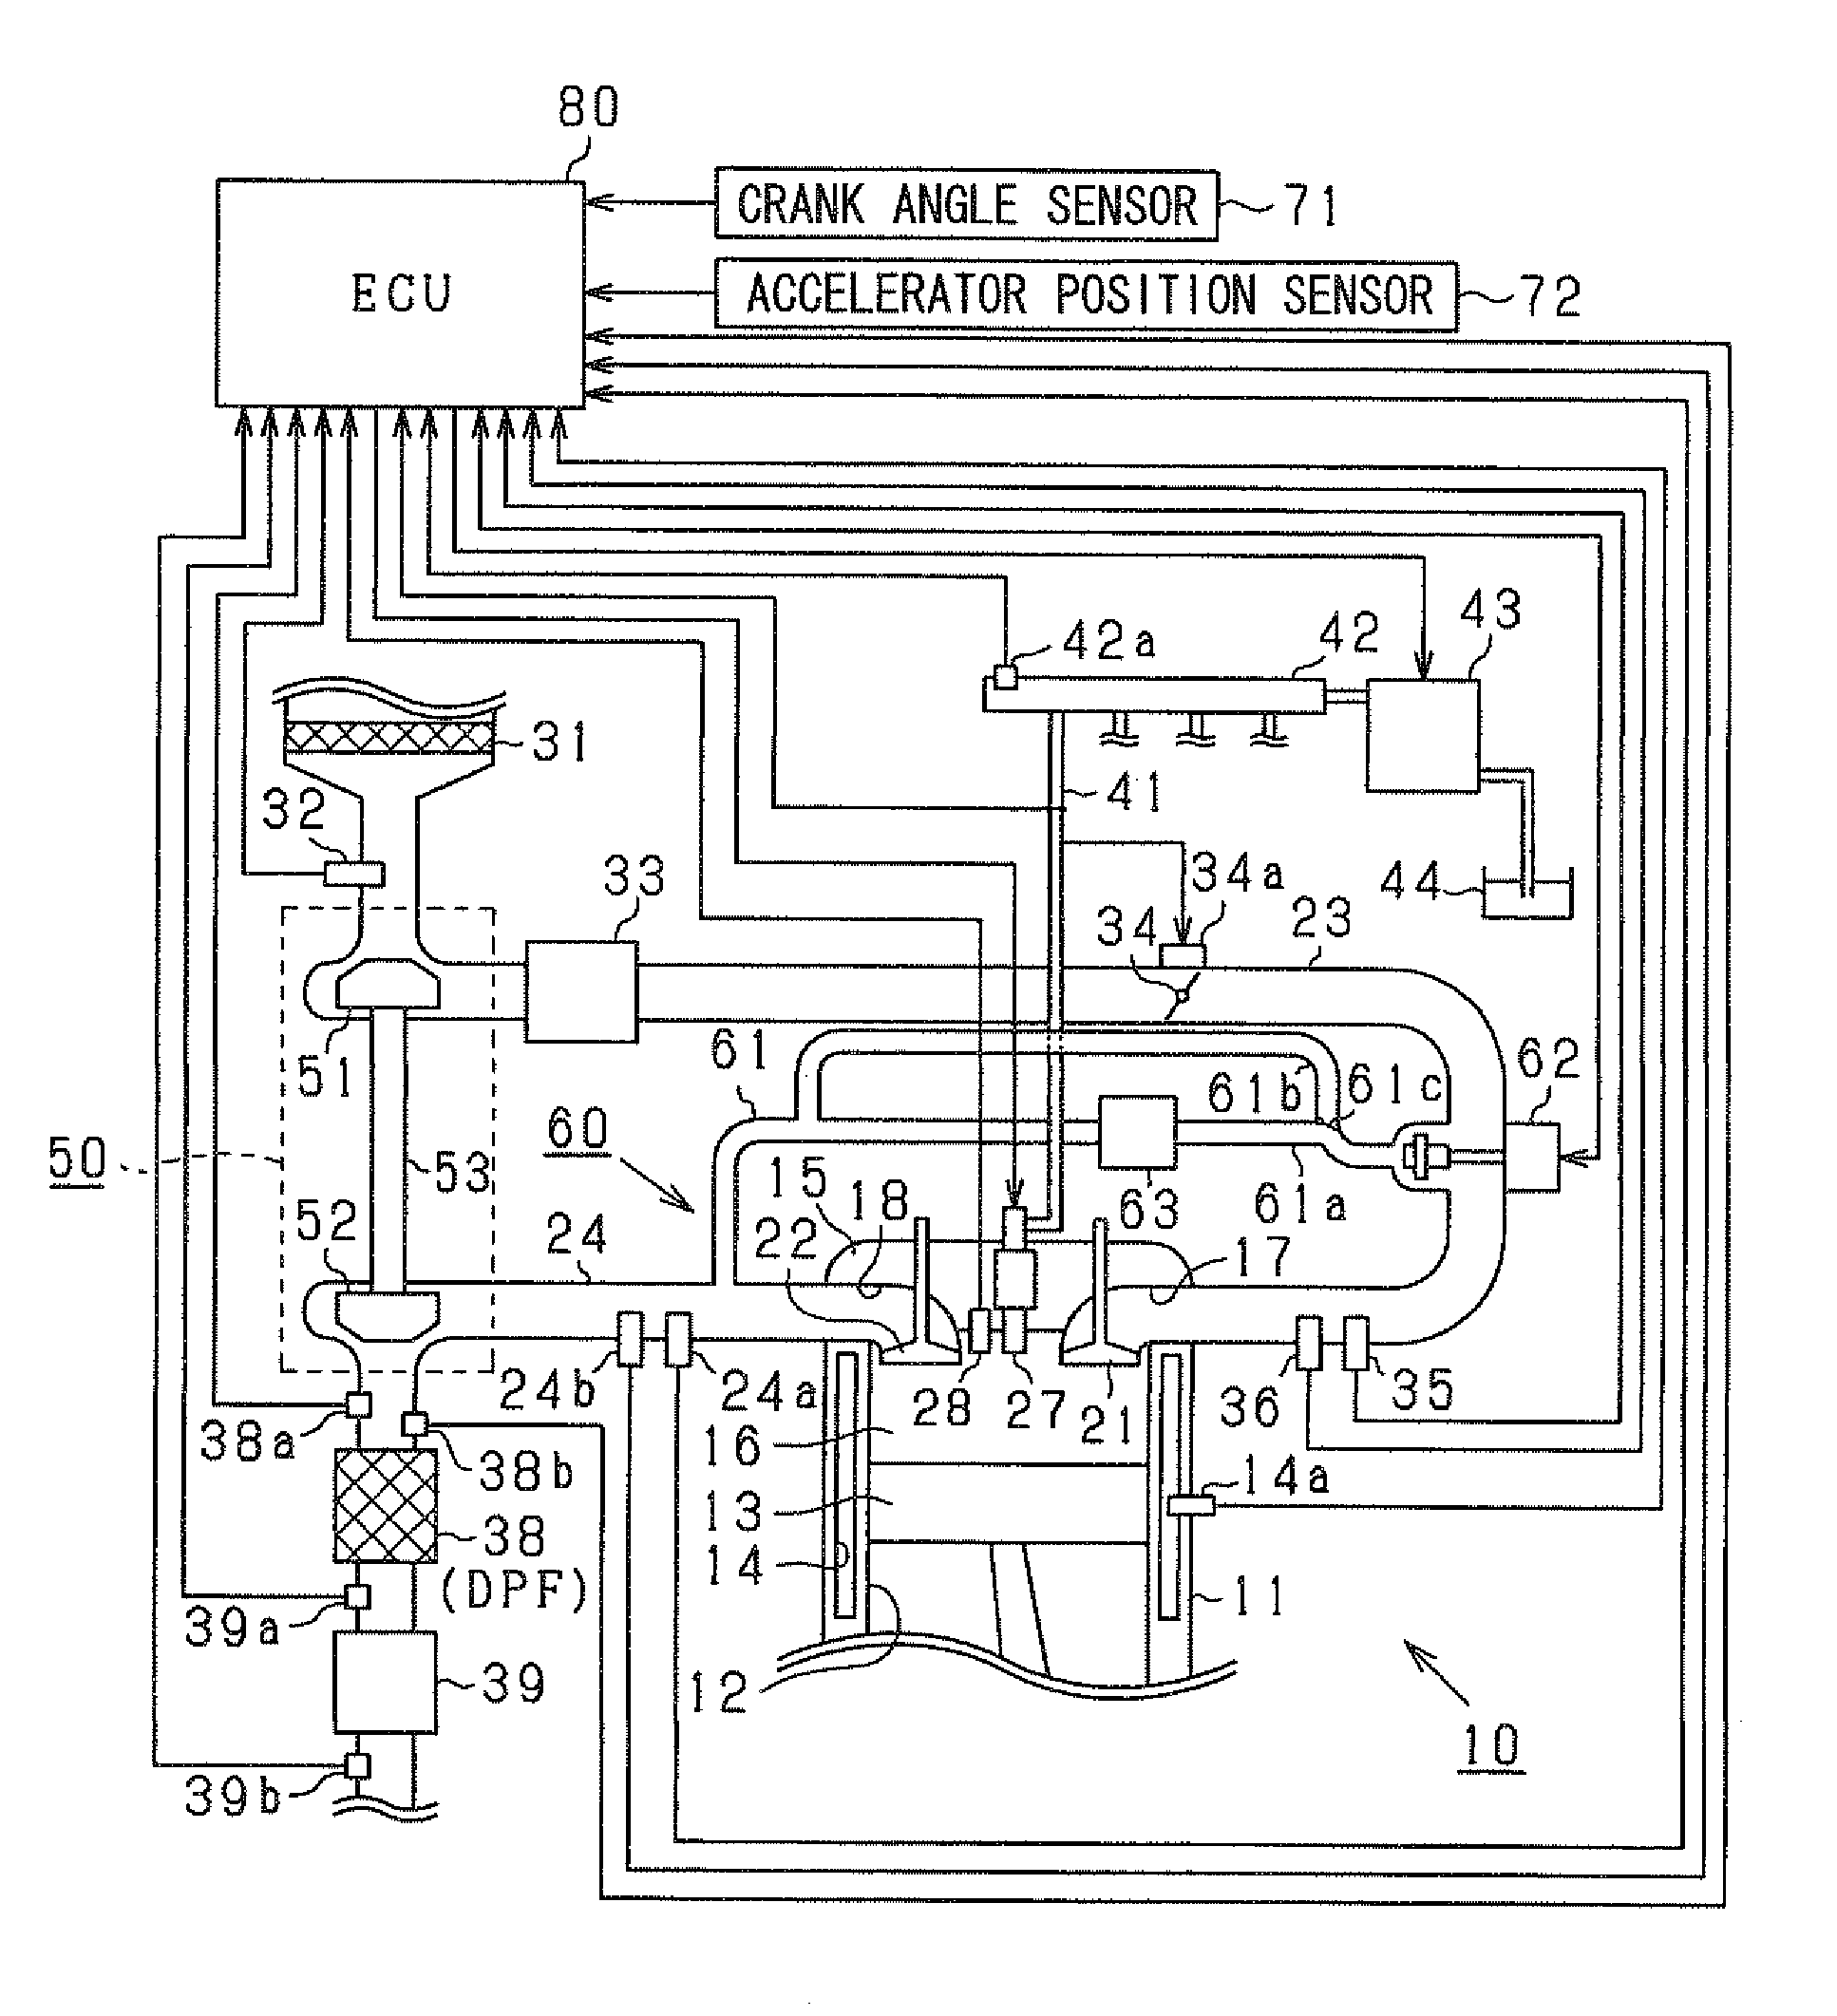 Combustion controller for compression-ignition direct-injection engine and engine control system for the same